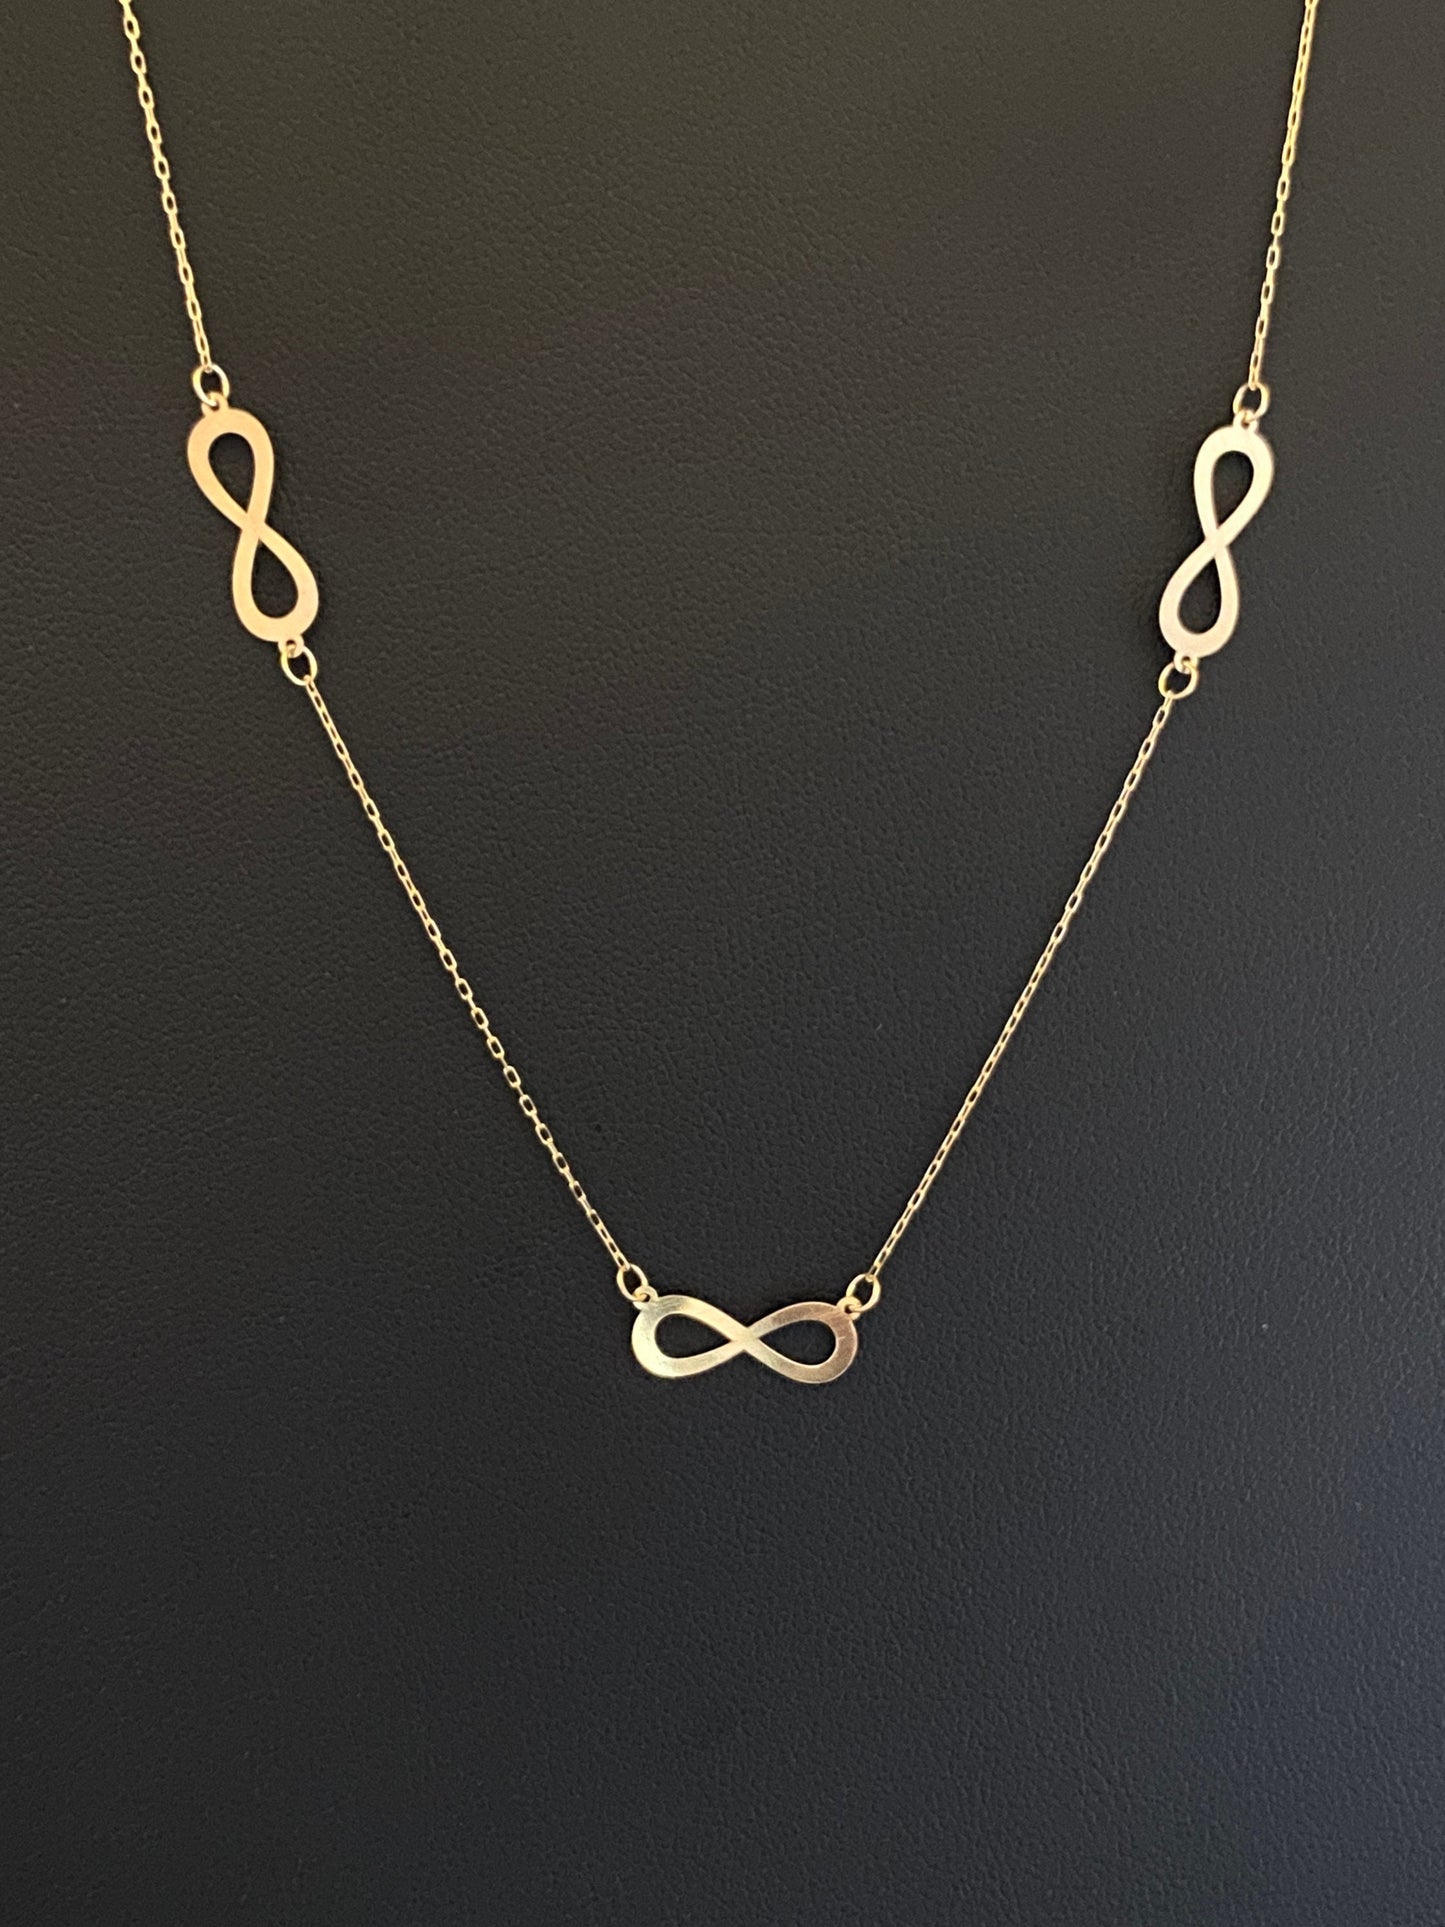 Yellow Gold Infinity Station Pendant Chain Link Necklace